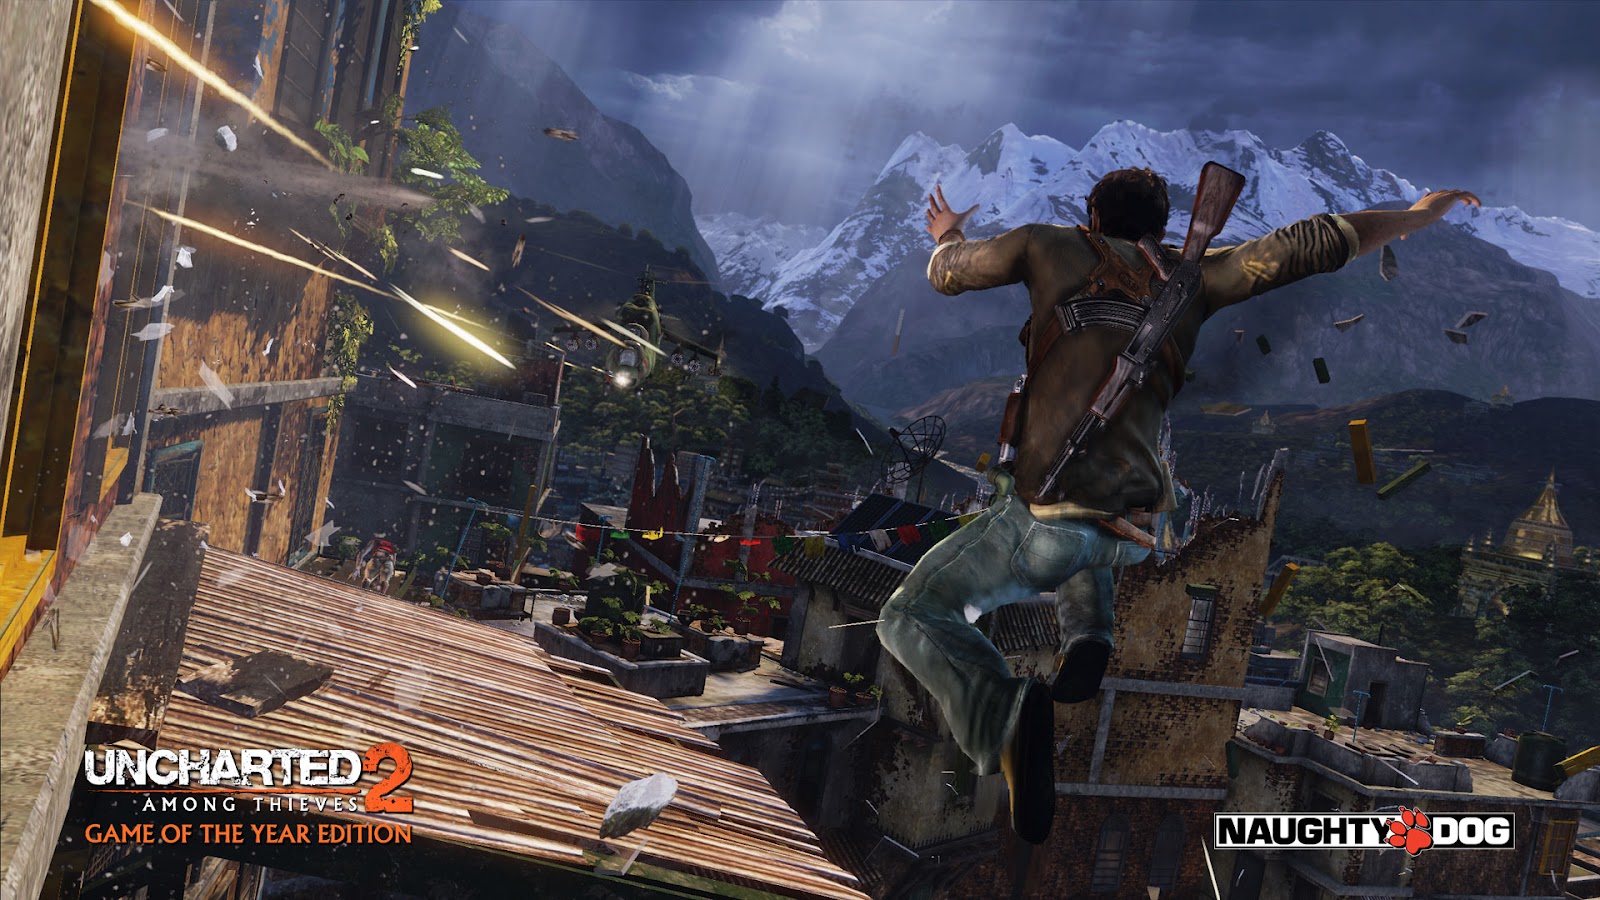 Wallpaper2 HD Uncharted Among Thieves Wallpaper In 1080p